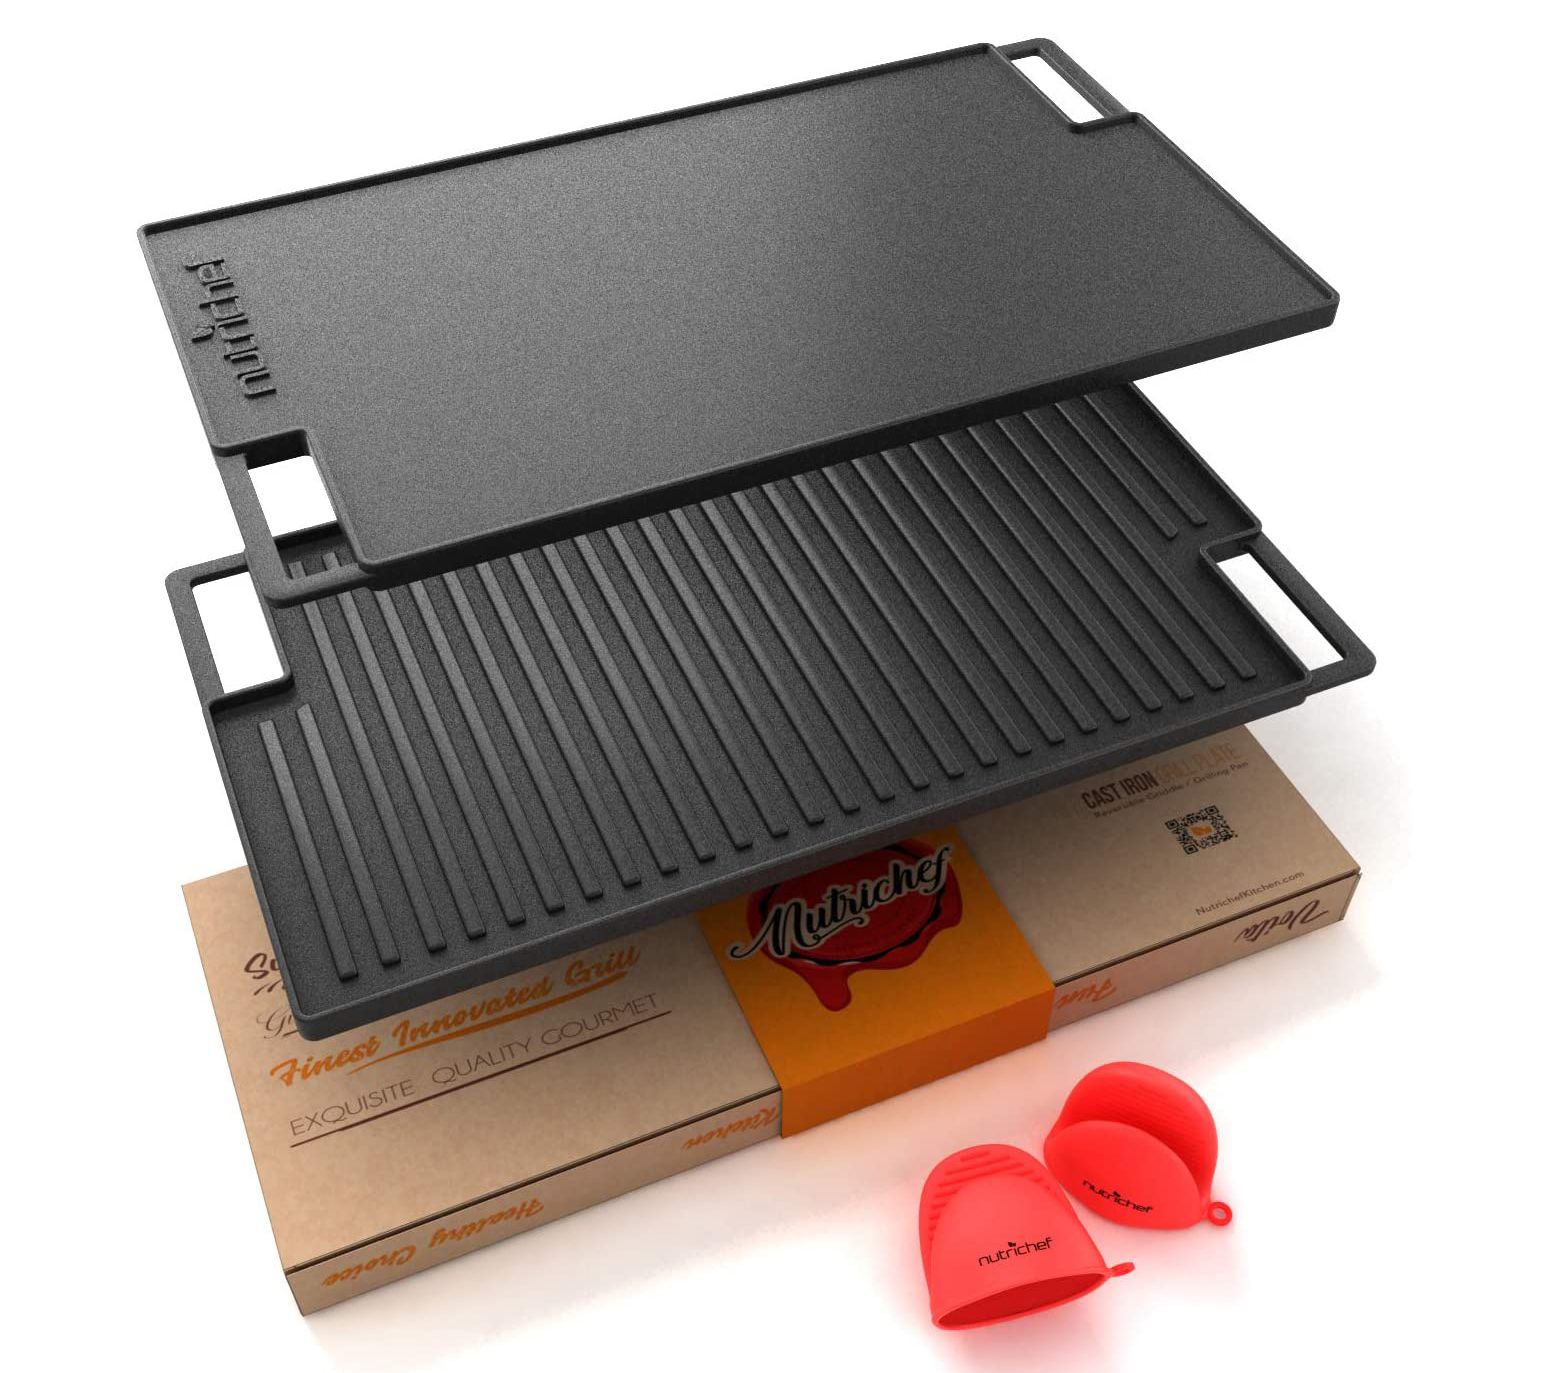 VIKING 20 REVERSIBLE GRILL/GRIDDLE, CAST IRON